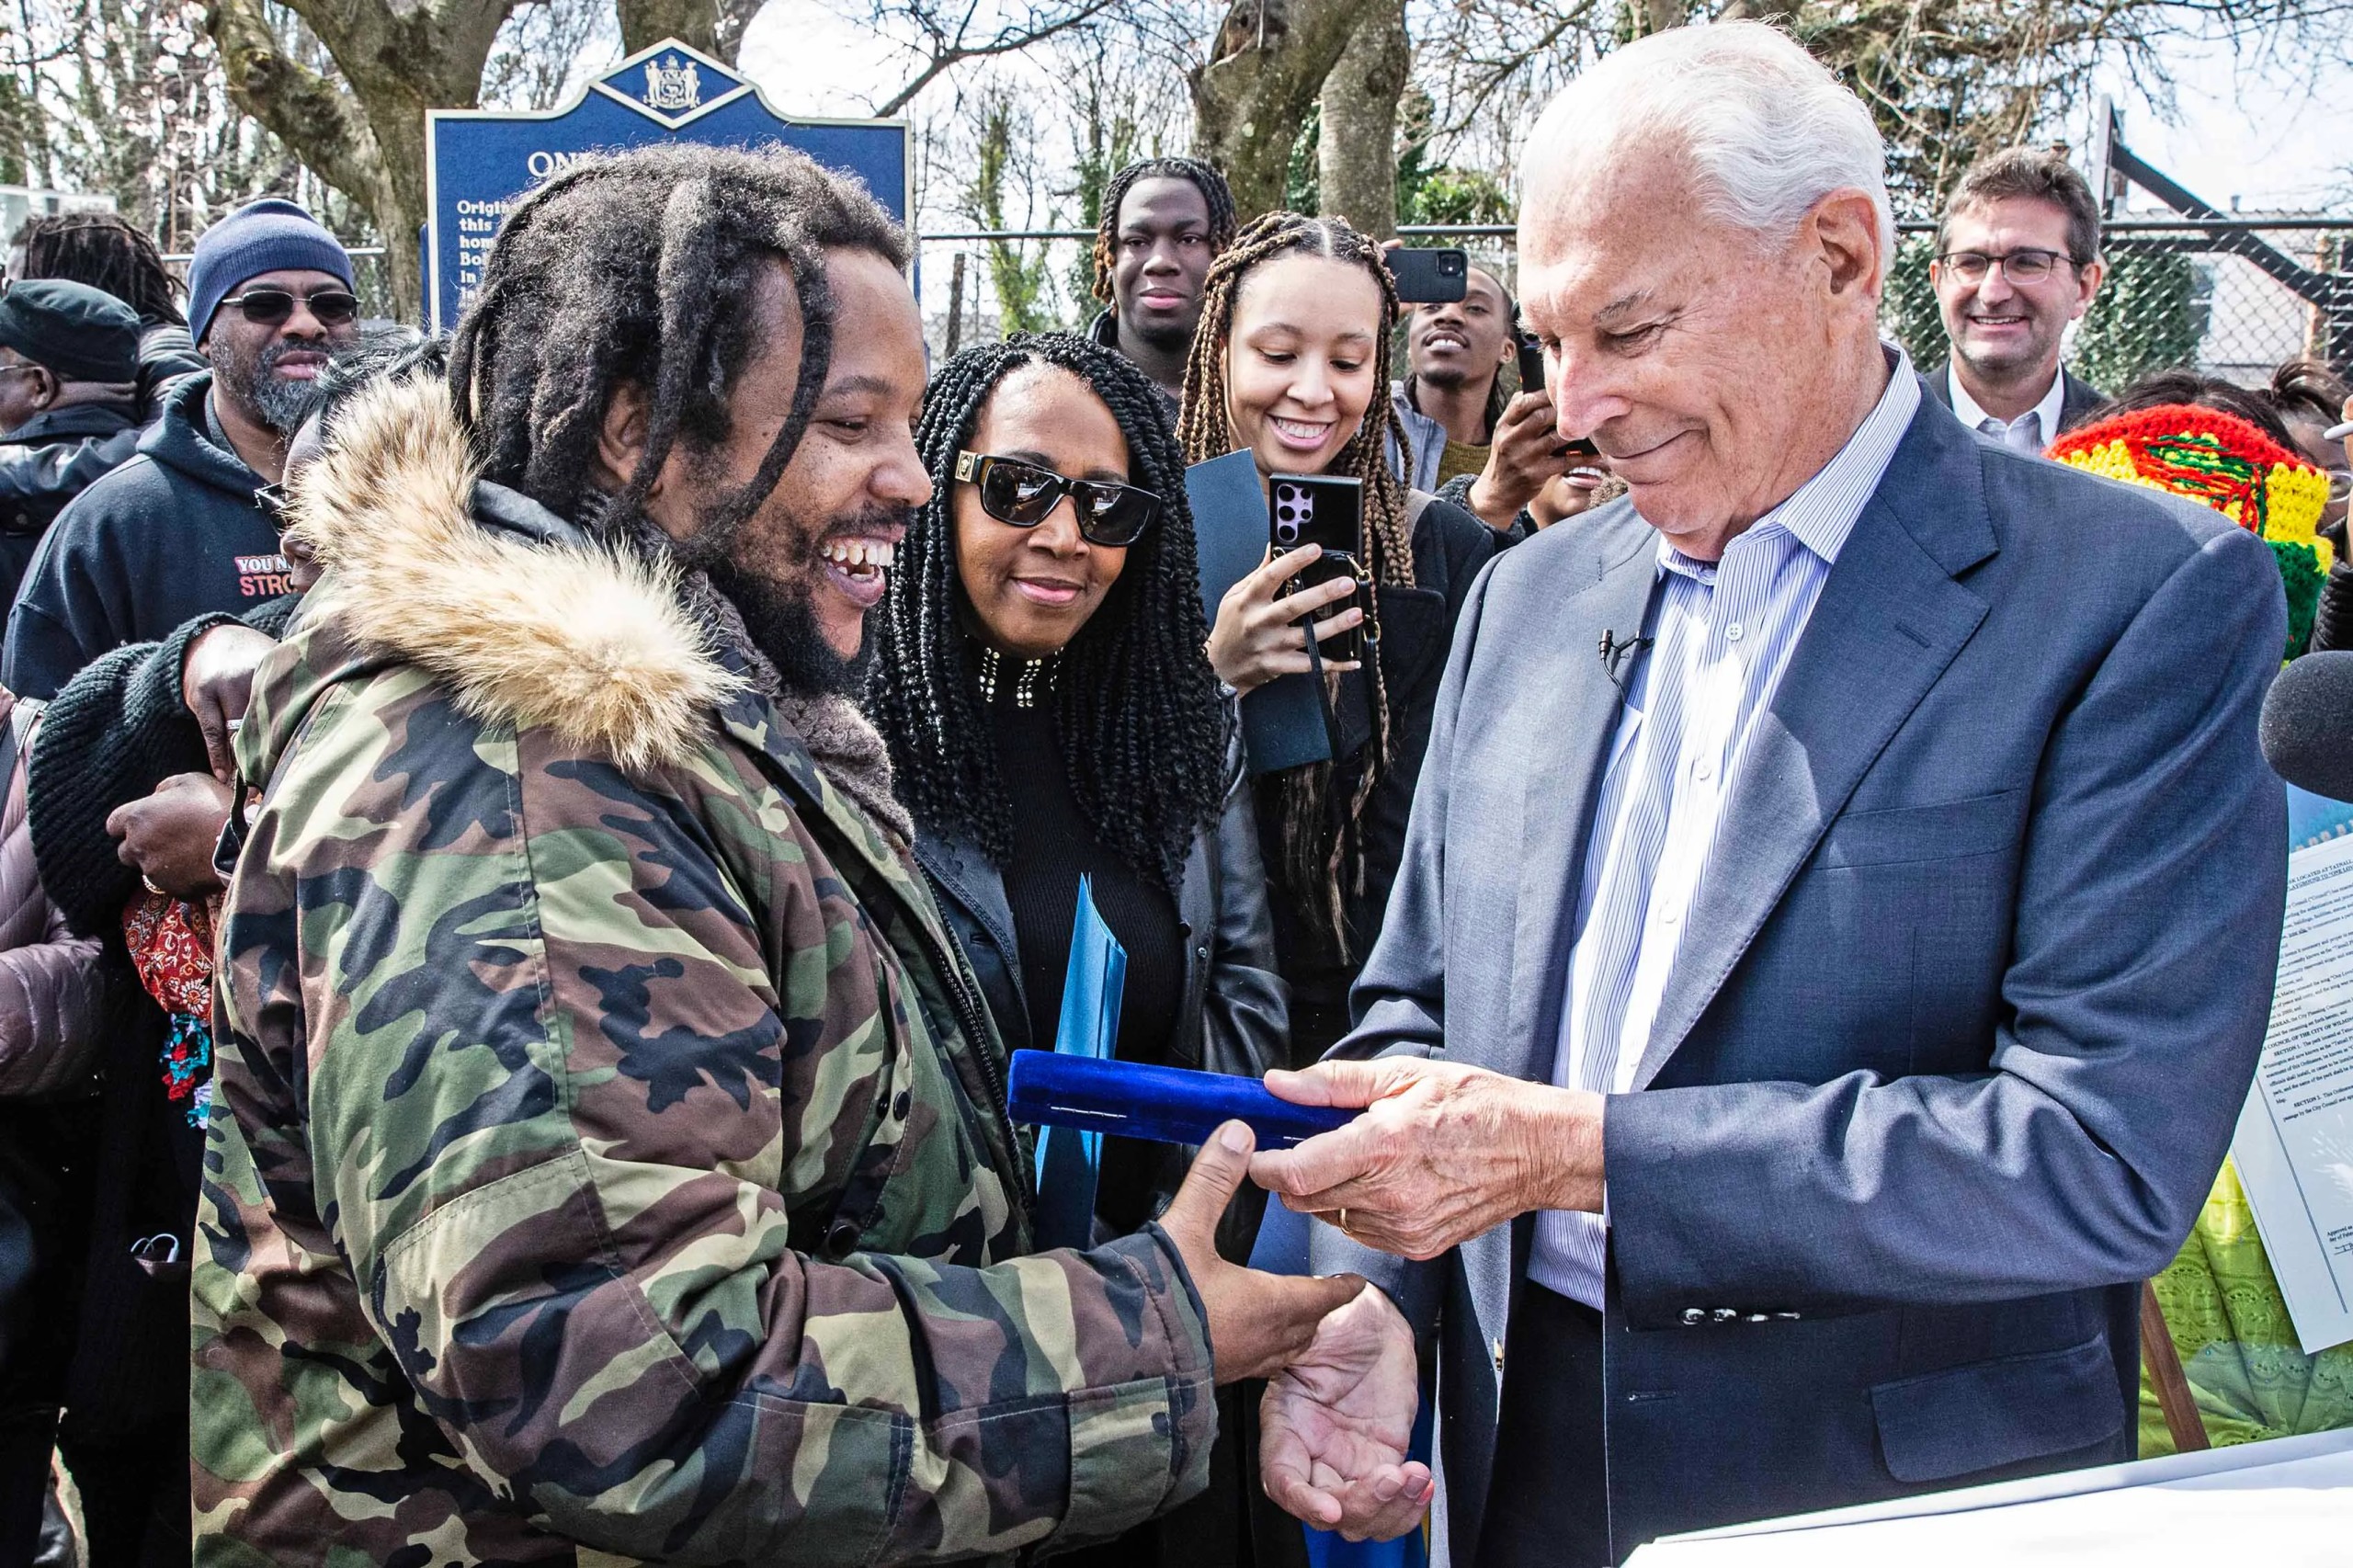  Stephen Marley Honored With ‘Key To The City’ Of Wilmington, His And Bob Marley’s First US Home 